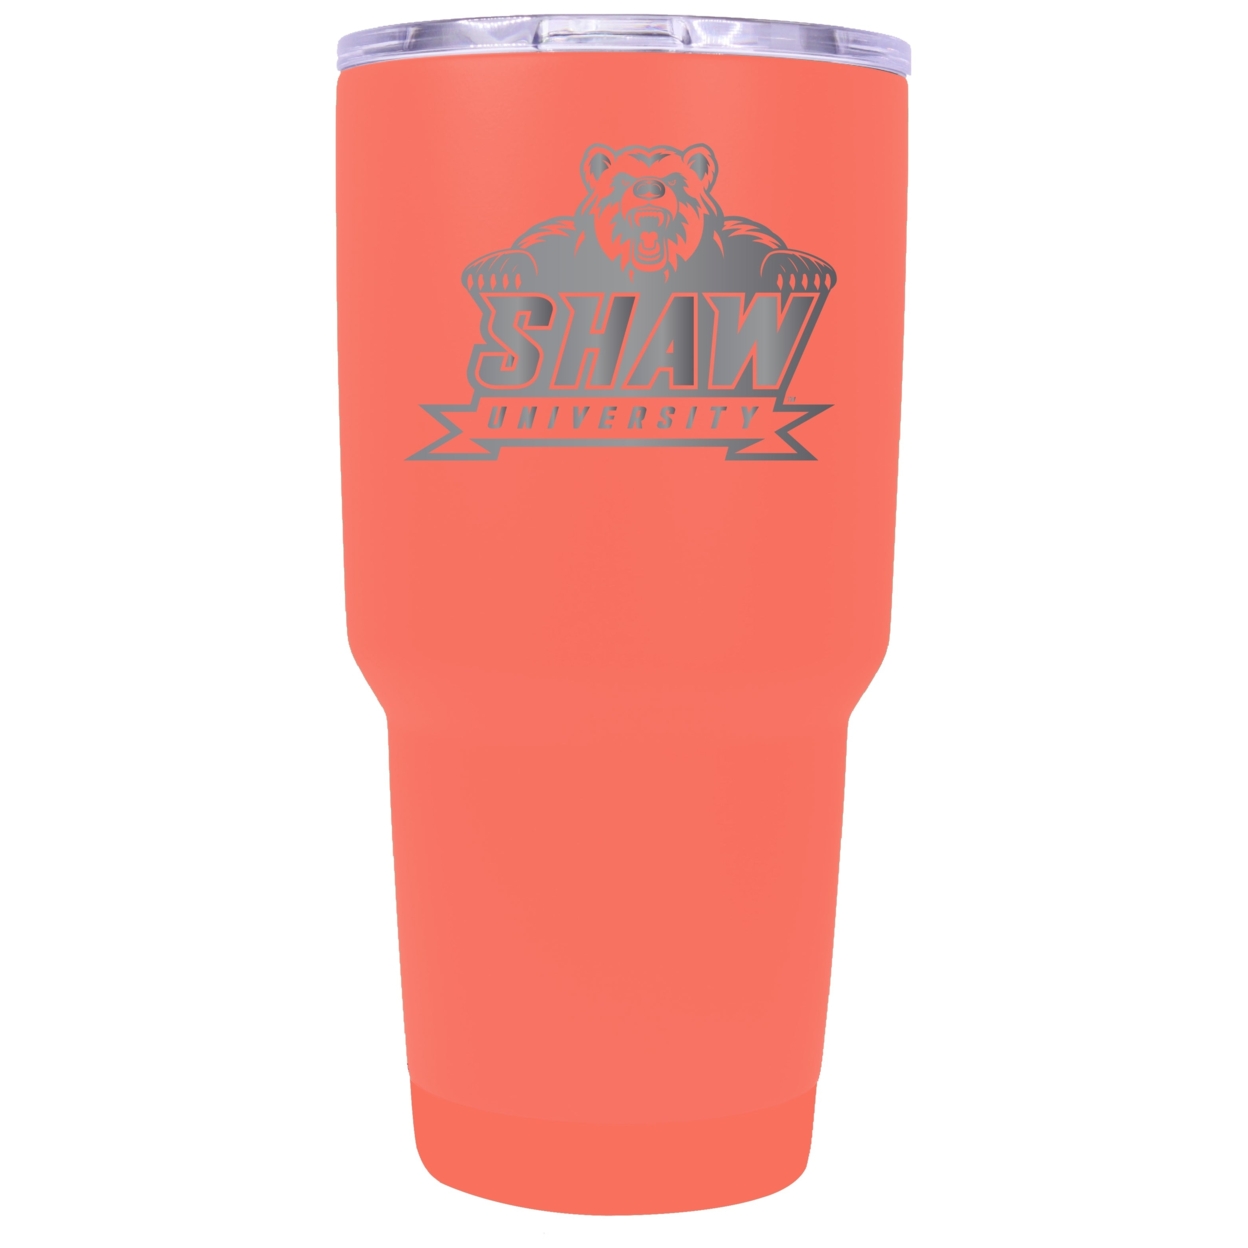 Shaw University Bears 24 Oz Laser Engraved Stainless Steel Insulated Tumbler - Choose Your Color. - Coral